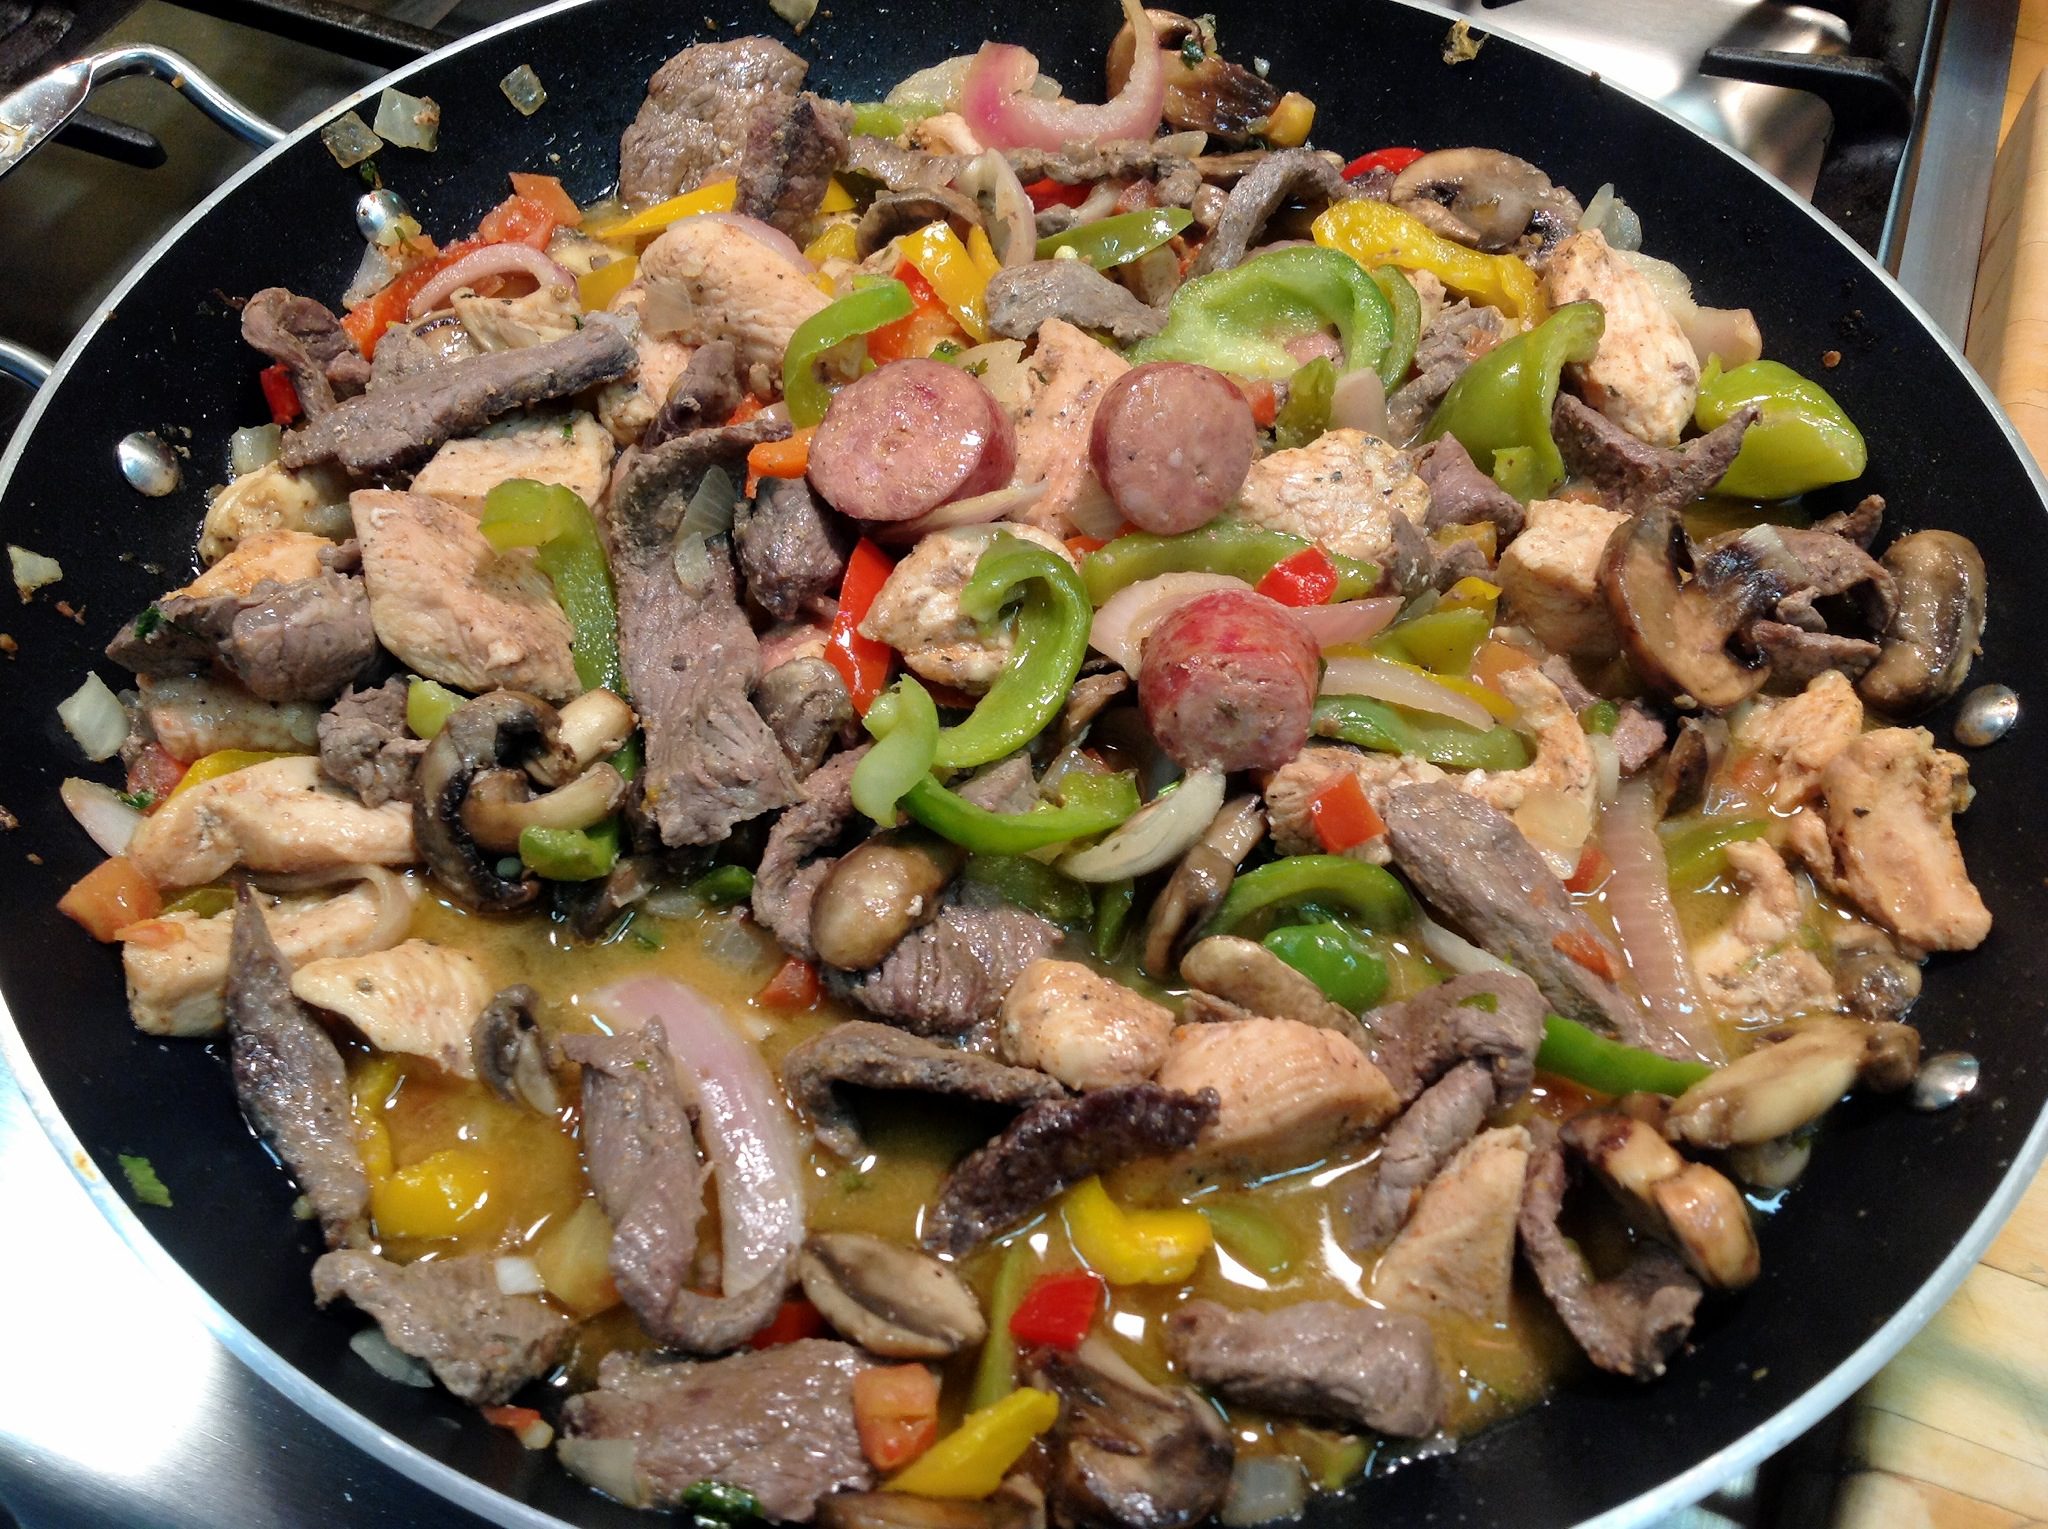 Alice's Medley of Beef, Chicken and Sausage Fajita Mix